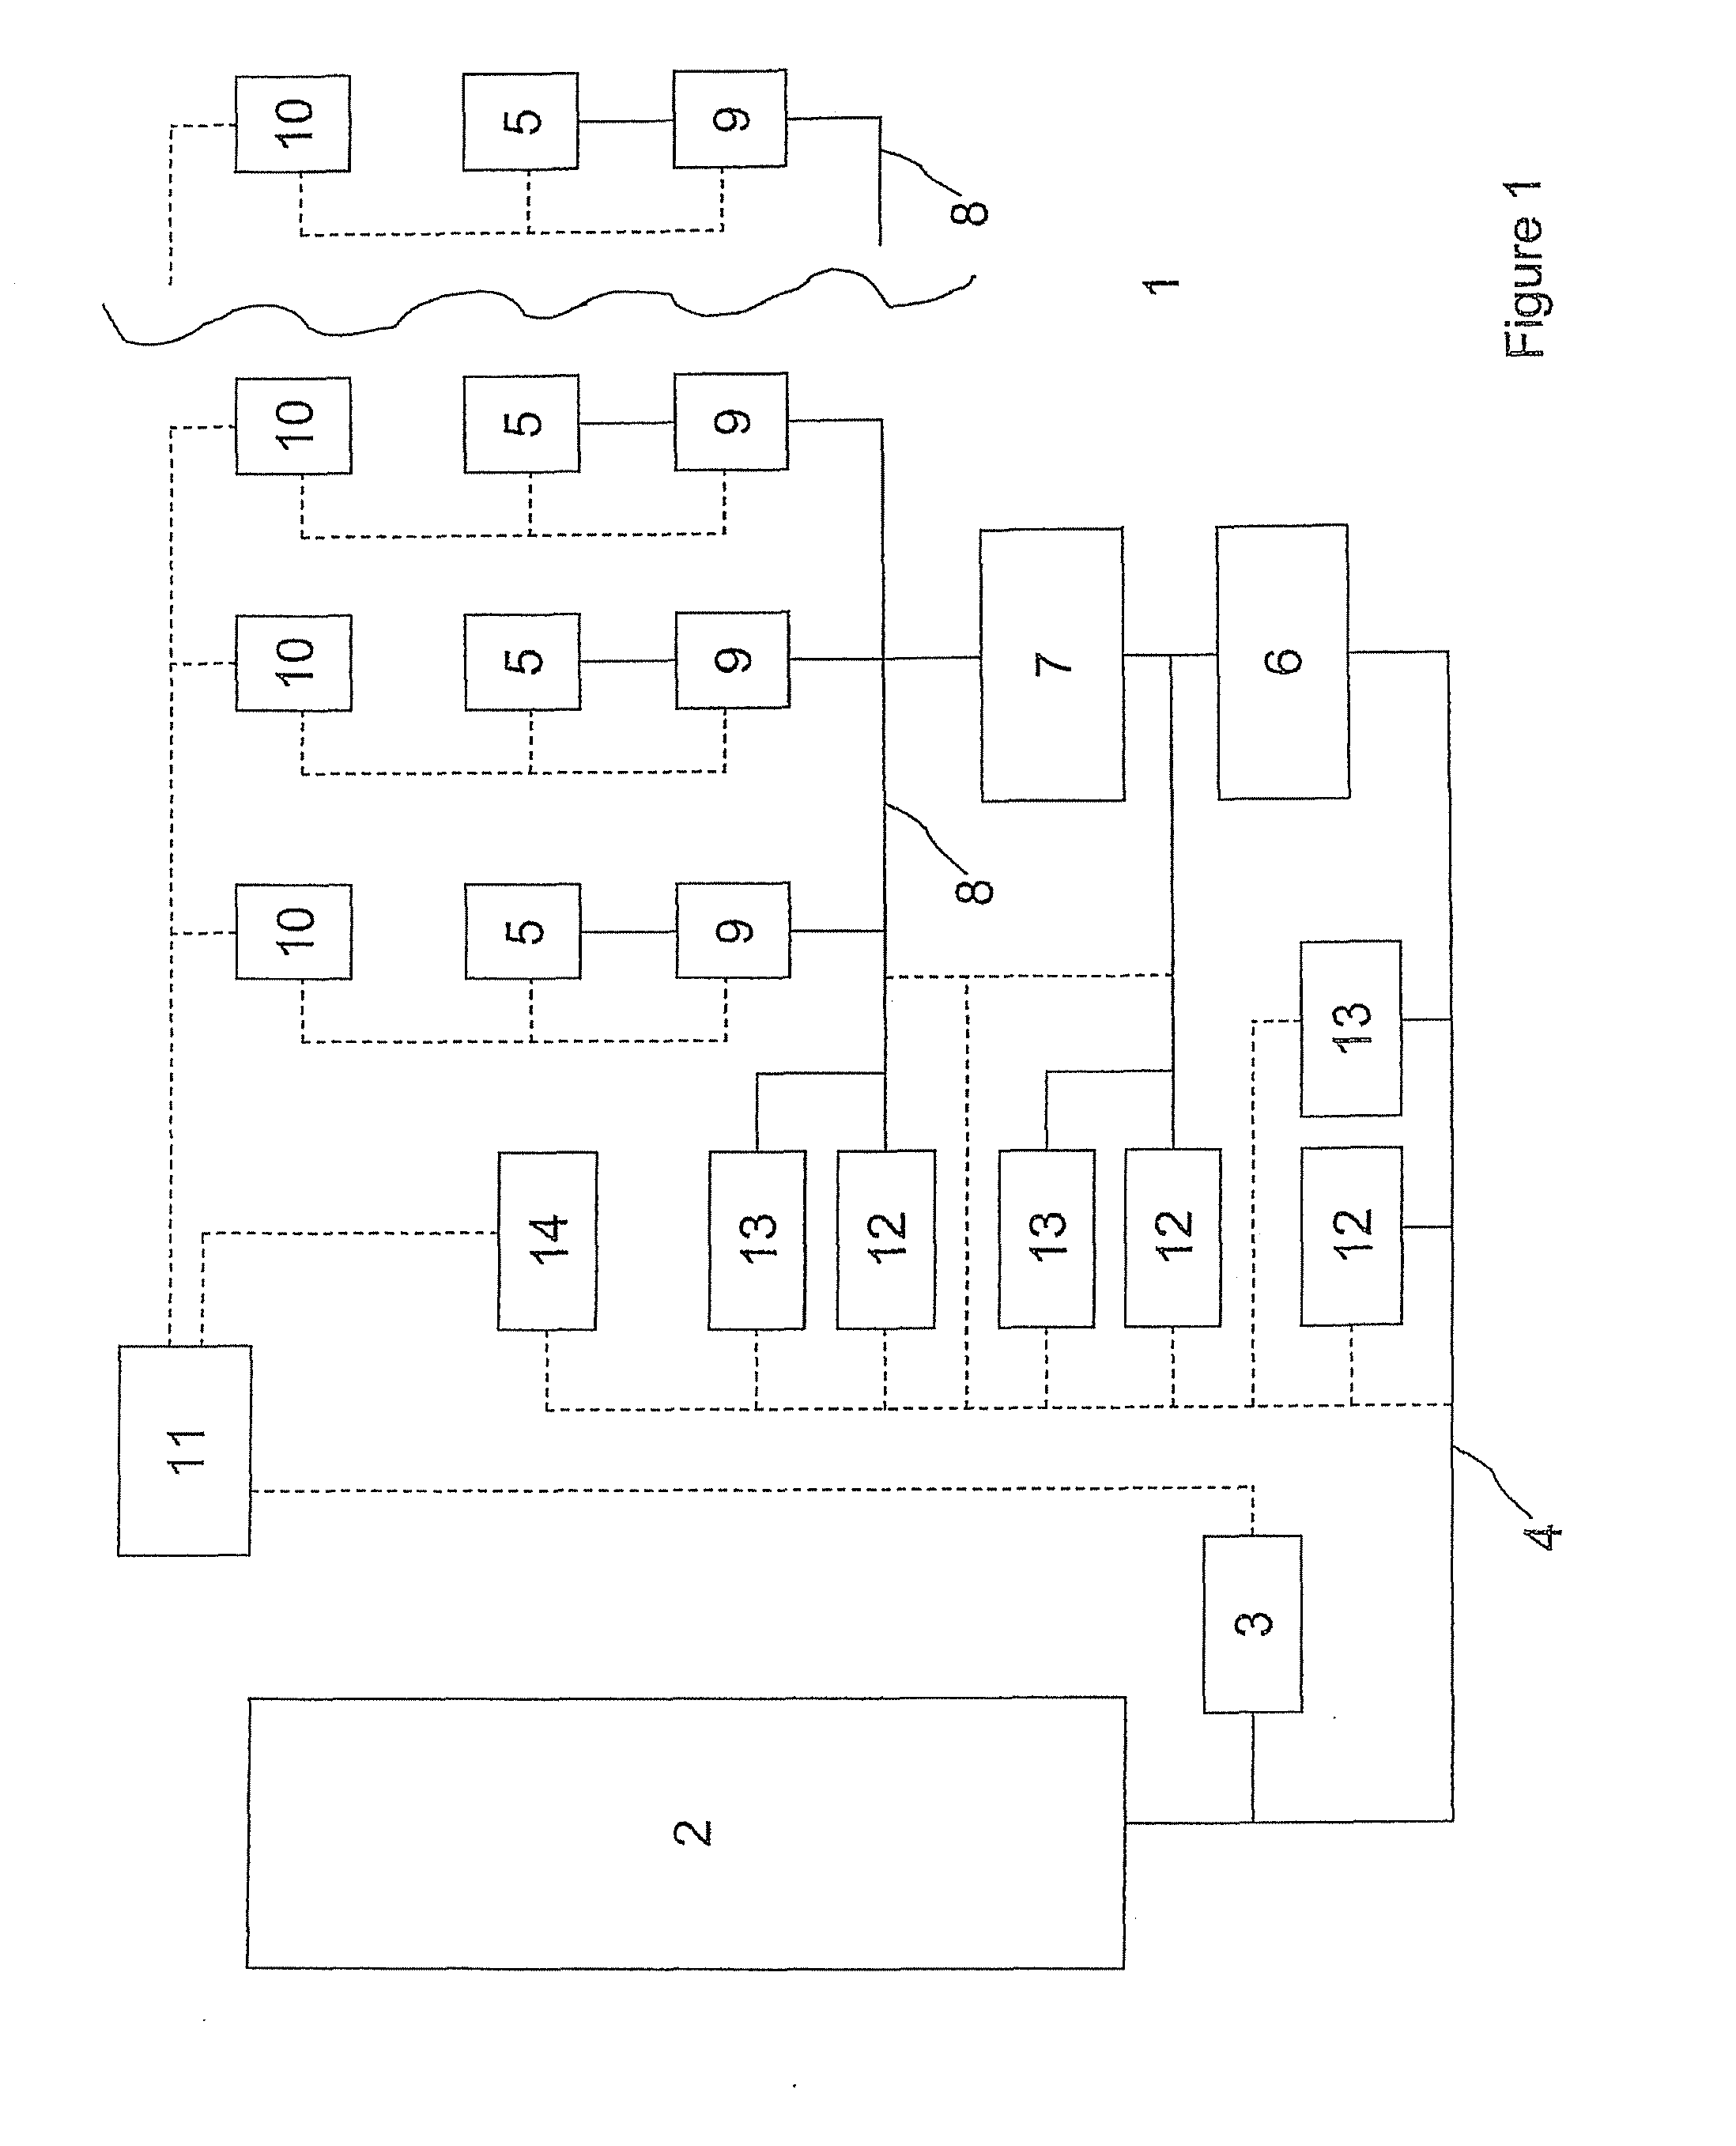 Power dispatch system for electrolytic production of hydrogen from wind power